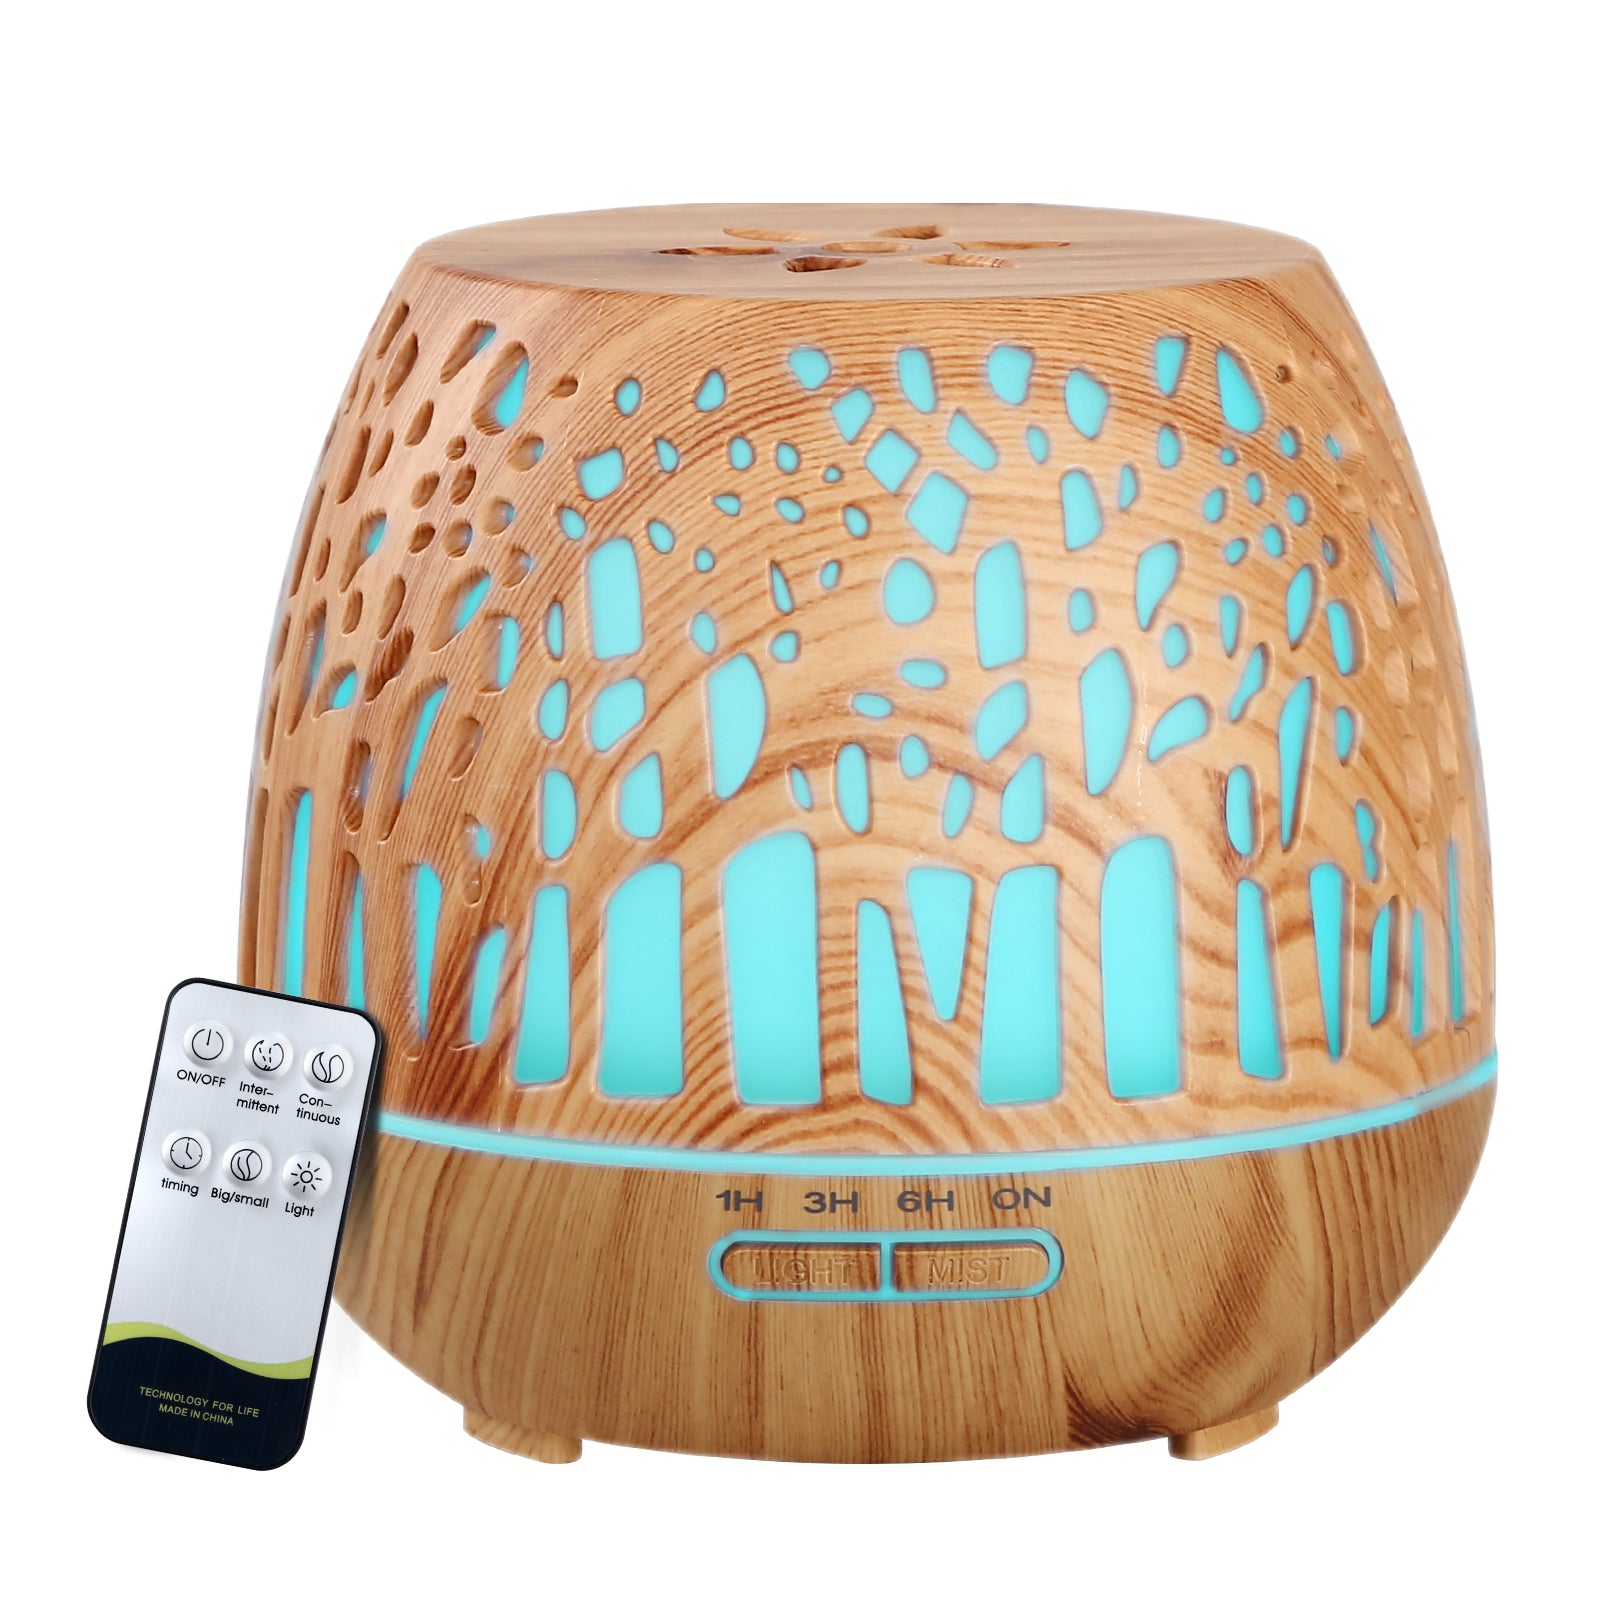 Aroma Diffuser Aromatherapy Humidifier Essential Oil Ultrasonic Cool Mist Wood Grain Remote Control 400ml - image1